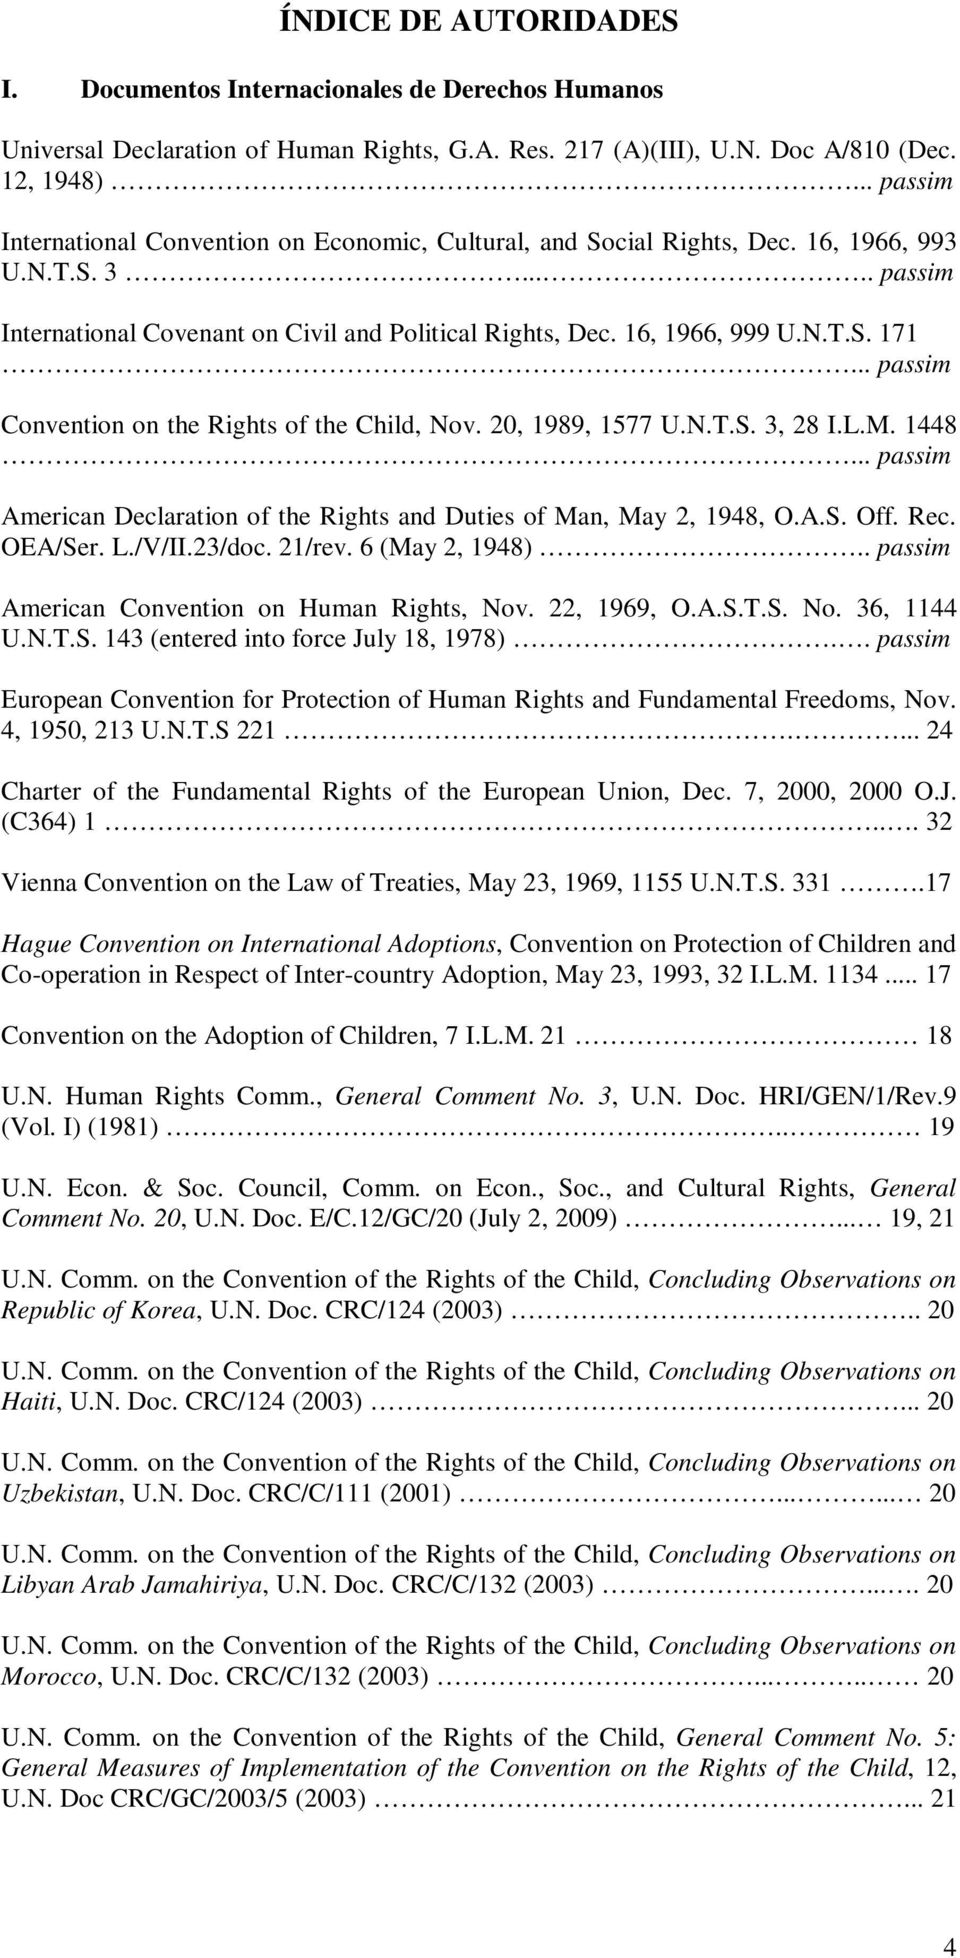 .. passim Convention on the Rights of the Child, Nov. 20, 1989, 1577 U.N.T.S. 3, 28 I.L.M. 1448... passim American Declaration of the Rights and Duties of Man, May 2, 1948, O.A.S. Off. Rec. OEA/Ser.